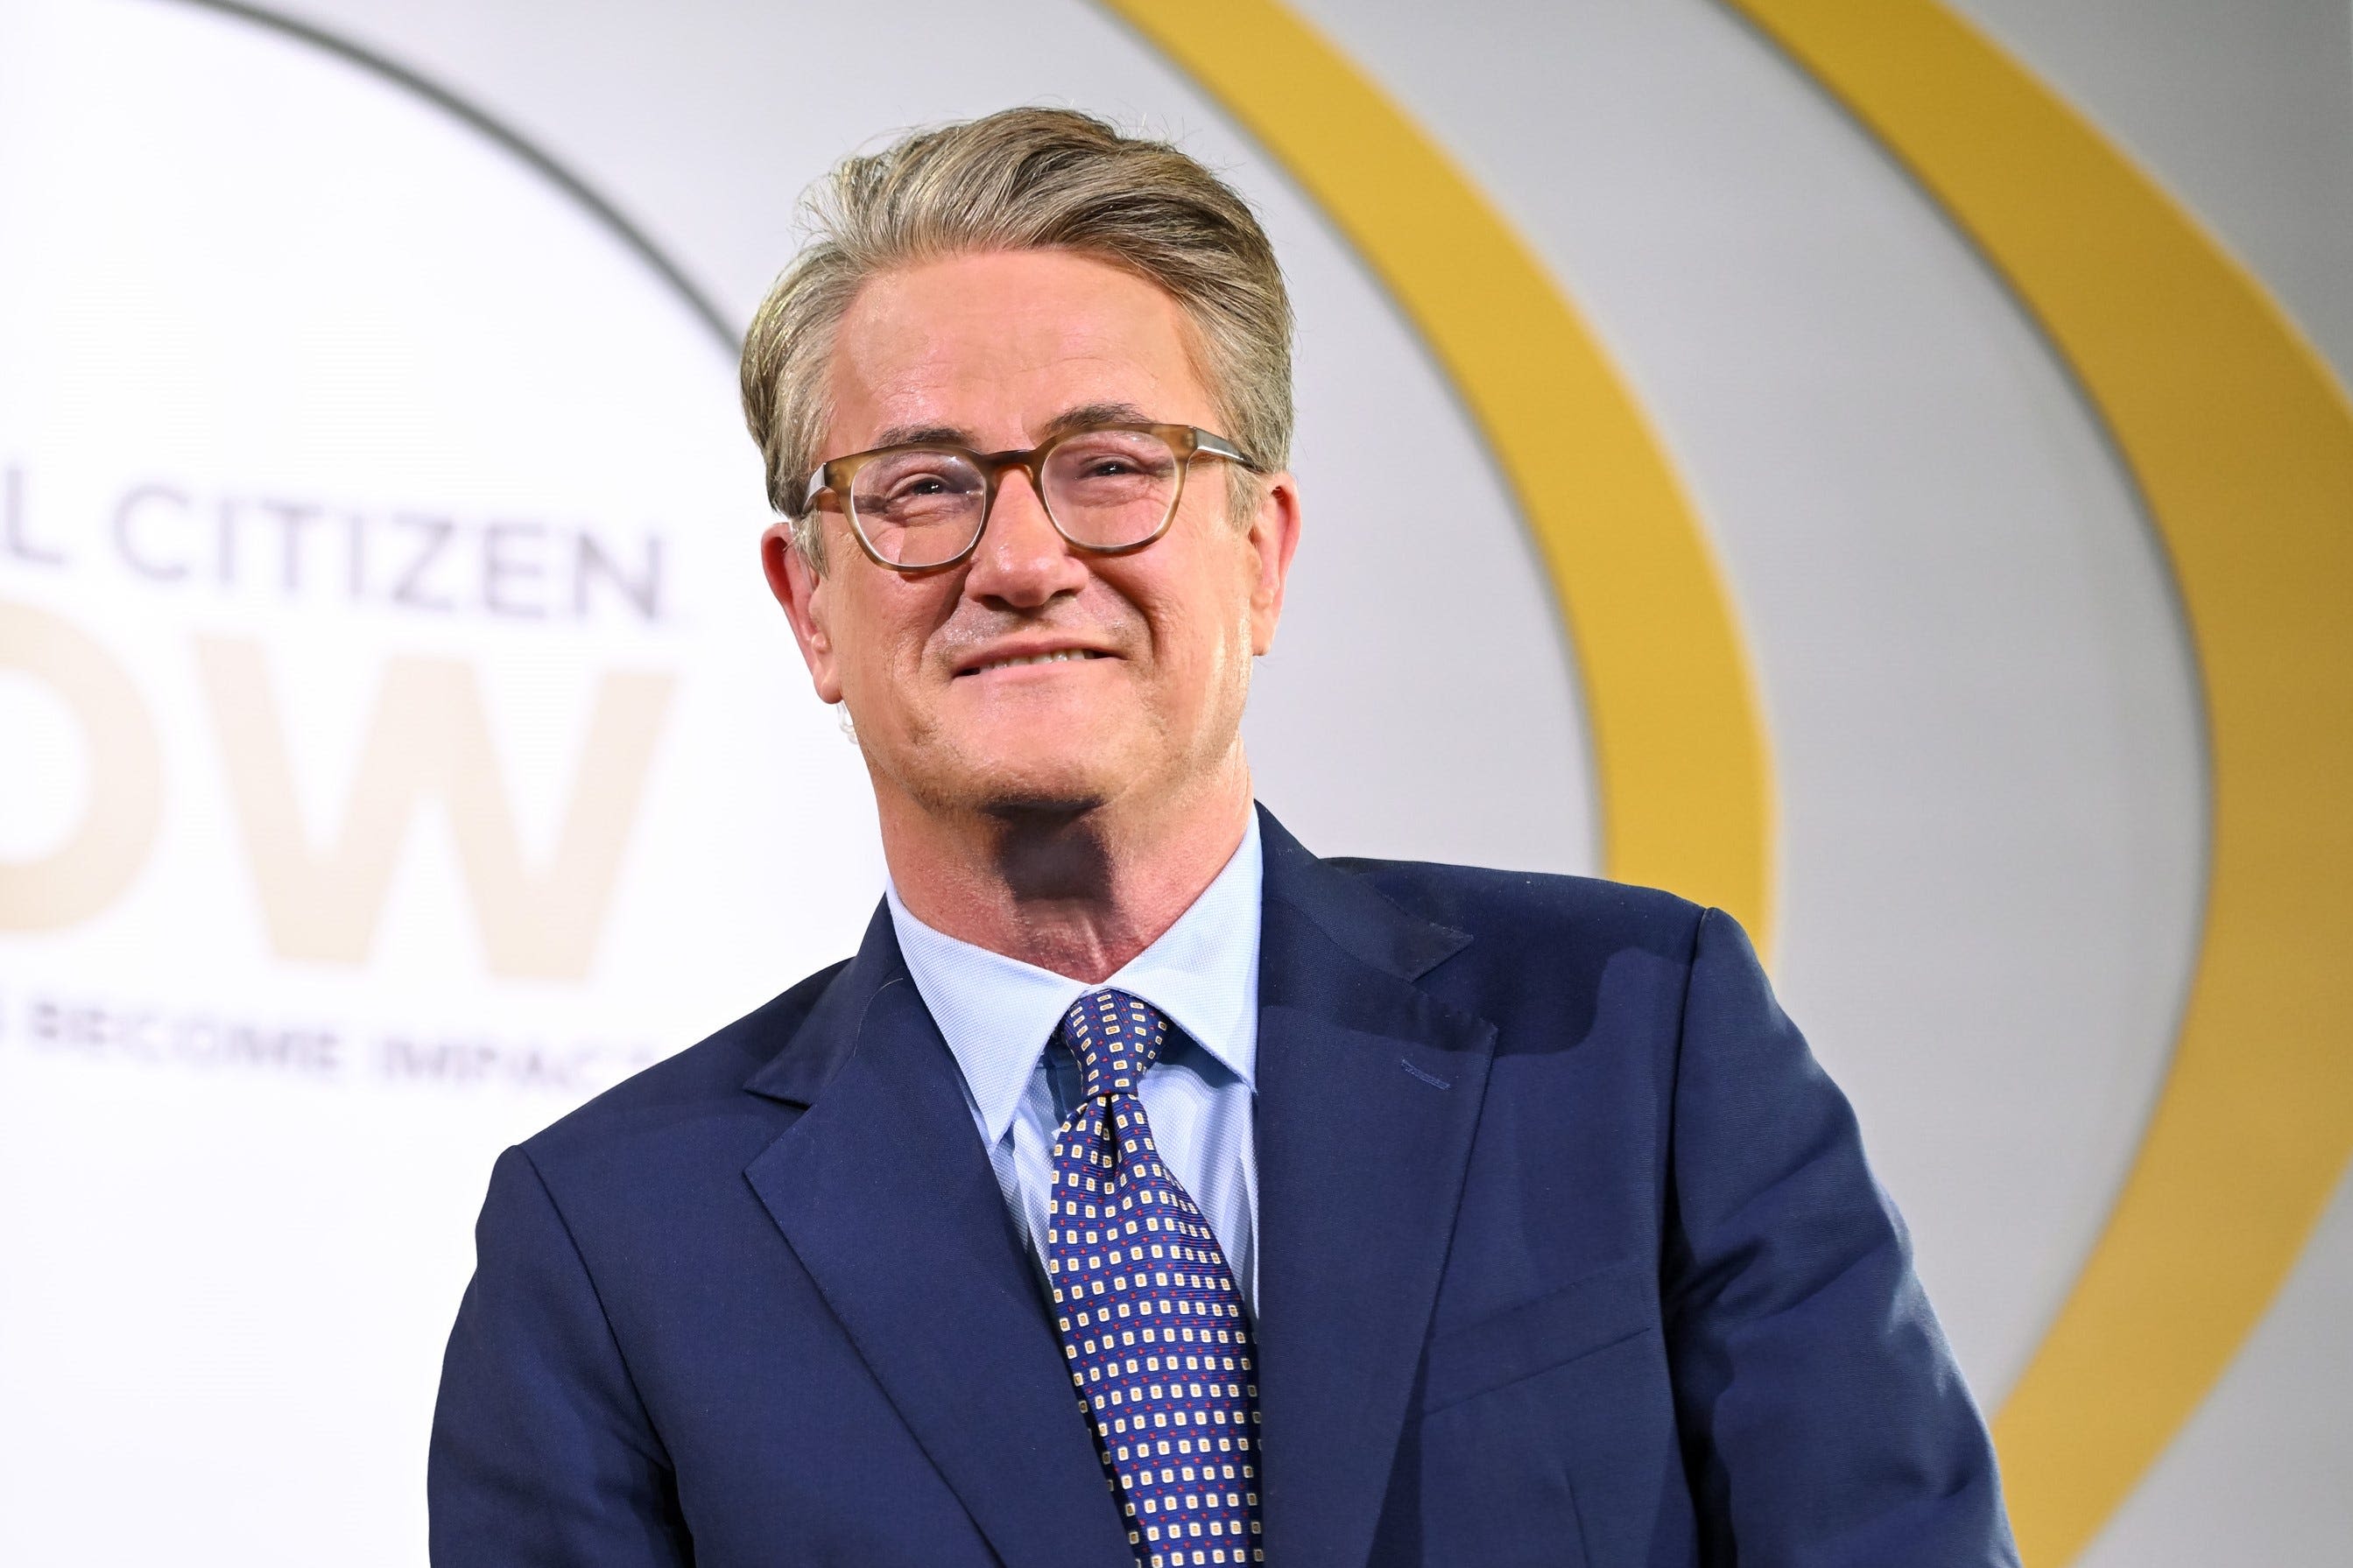 Why didn't 'Morning Joe' air on Monday? MSNBC says show will resume normally Tuesday